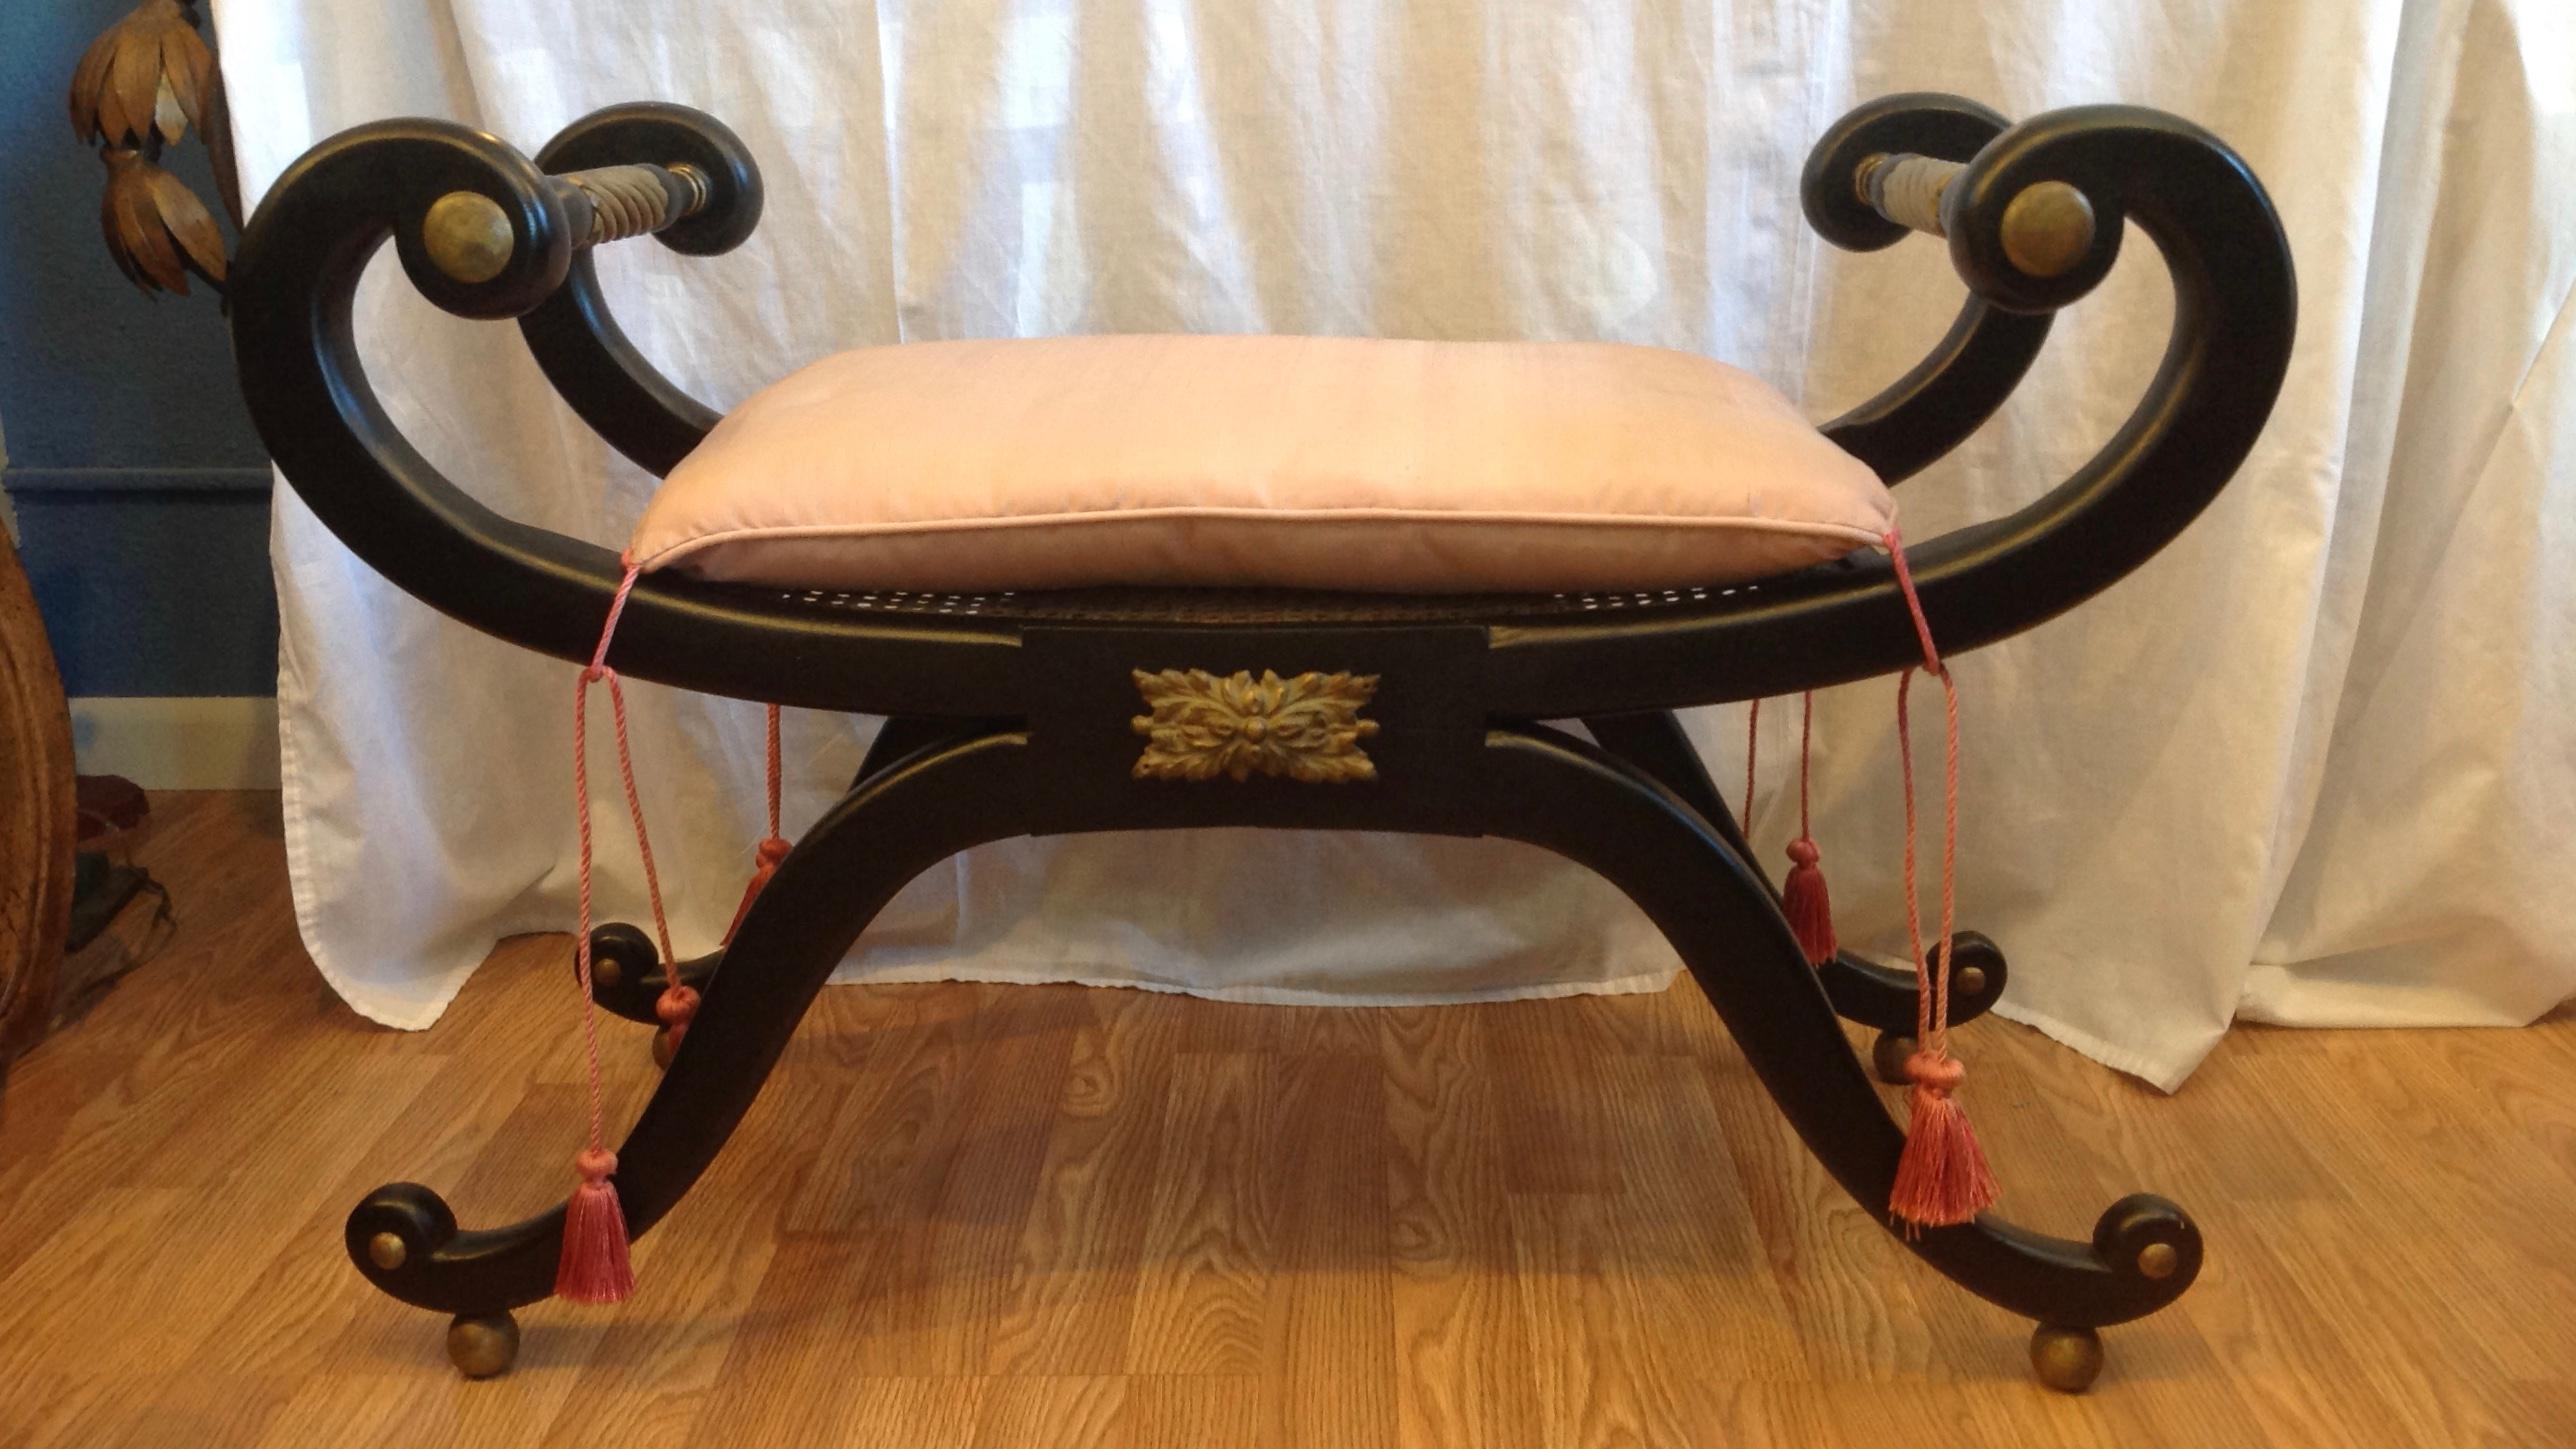 An elegant bench - Curule style with gilt appointed handles.
The bench has a caned seat fitted with s tassels appointed loose silk cushion.
Fine continental styling.